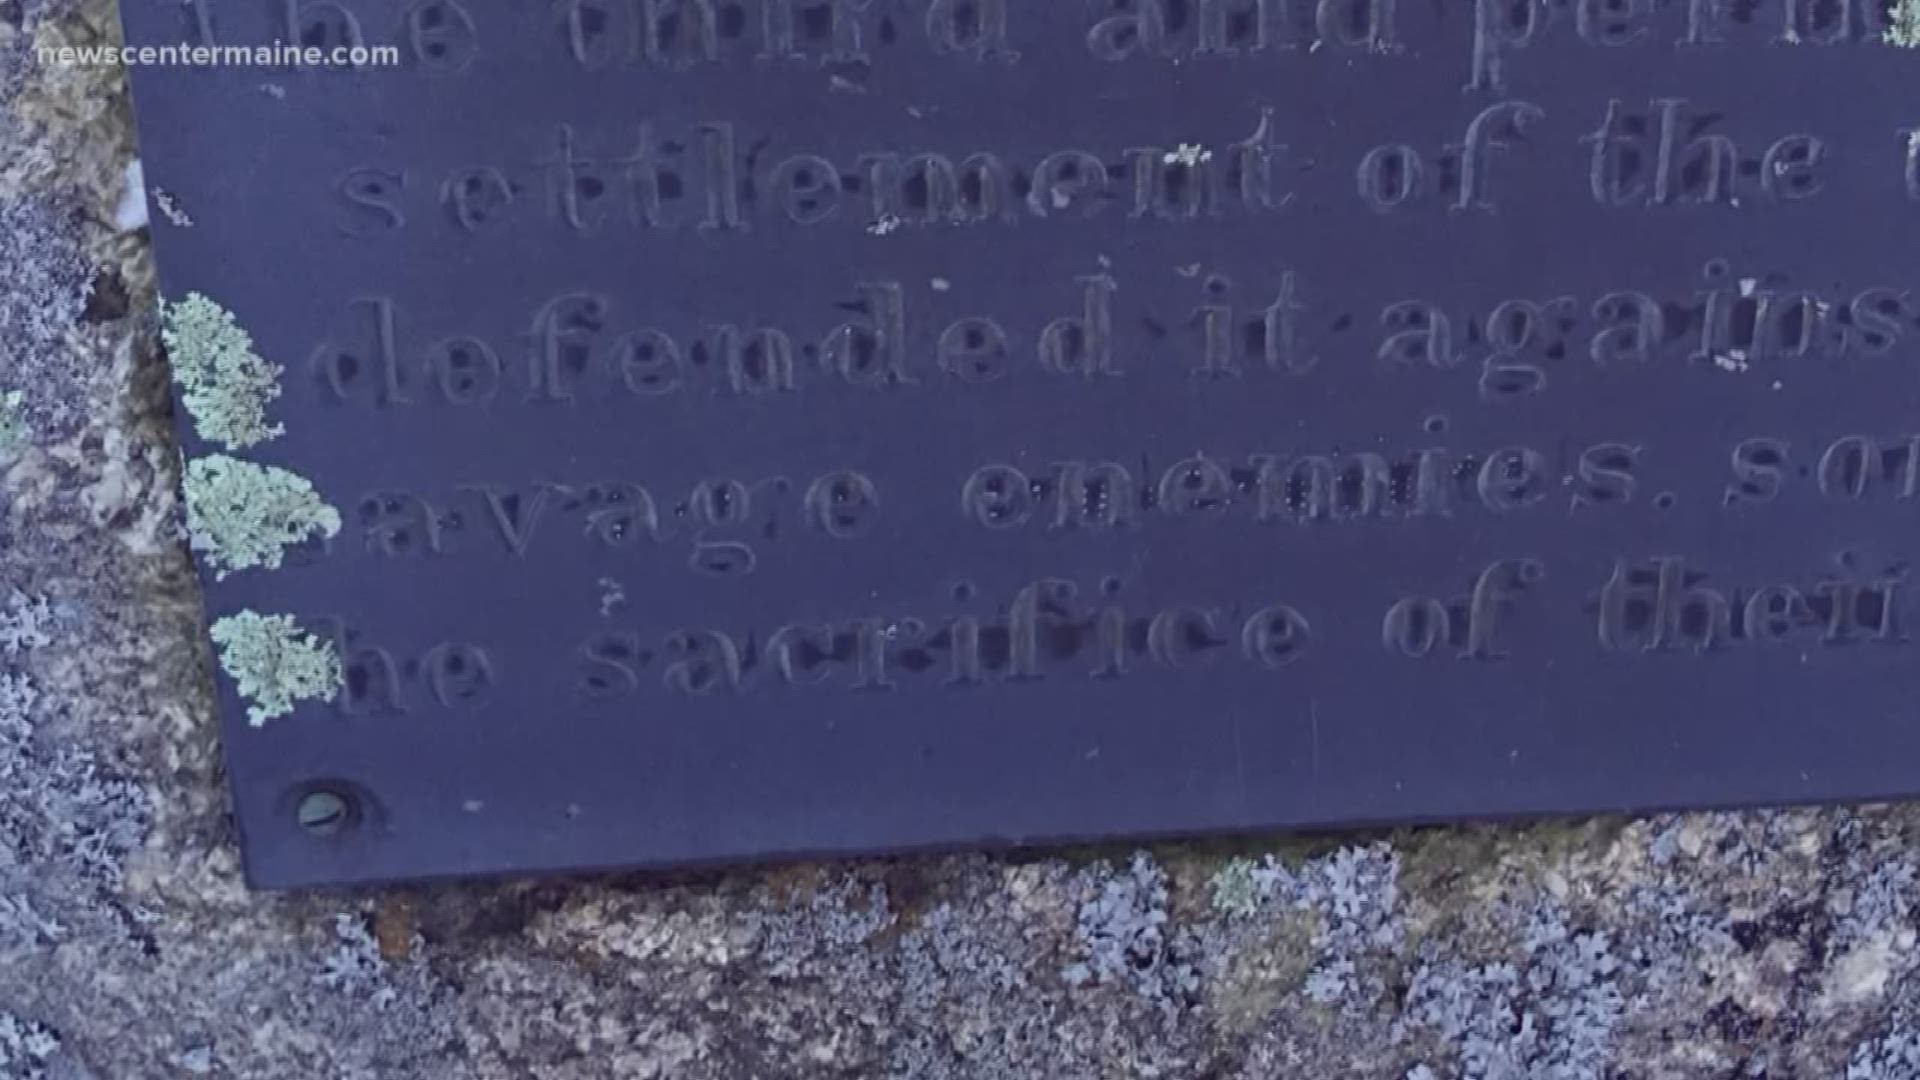 Plaque with 'savage enemies' removed